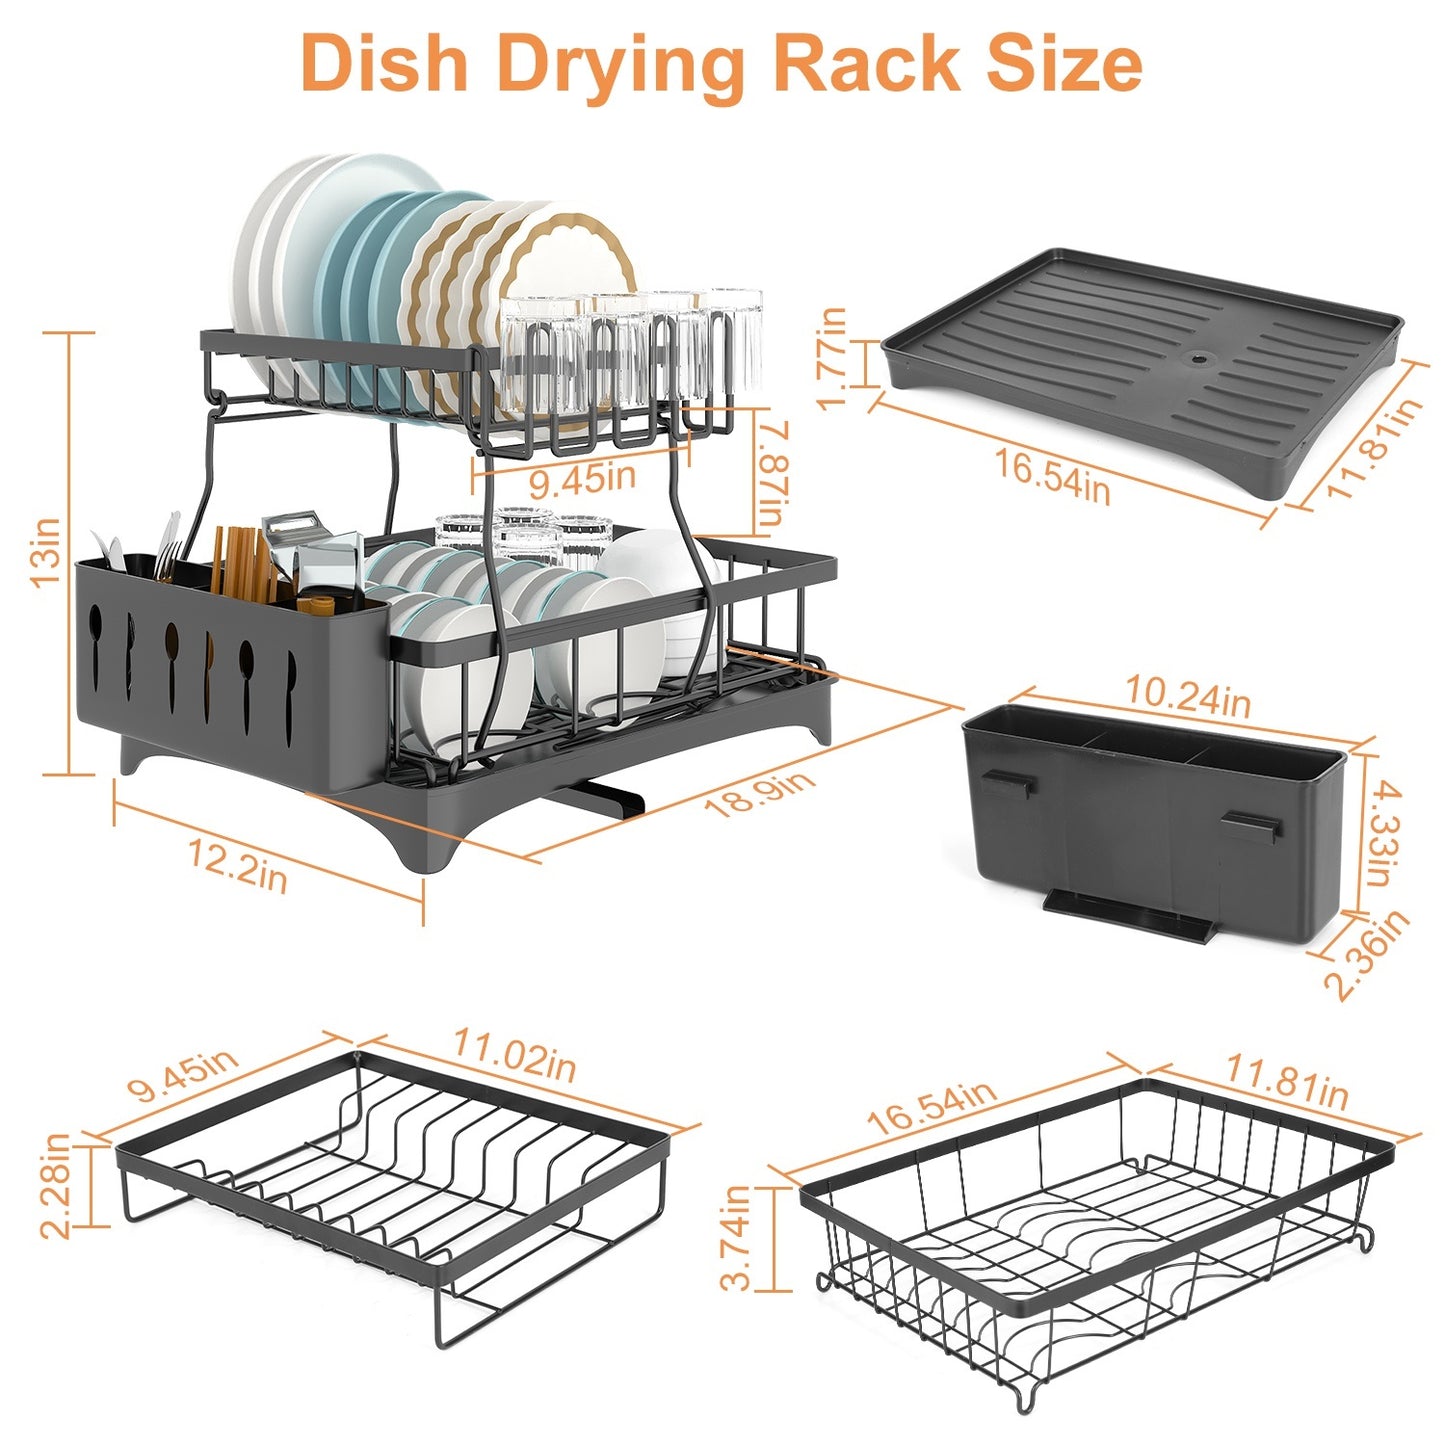 Dish Drying Rack with Drainboard Detachable 2-Tier Dish Rack Drainer Organizer Set with Utensil Holder Cup Rack Swivel Spout for Kitchen Counter